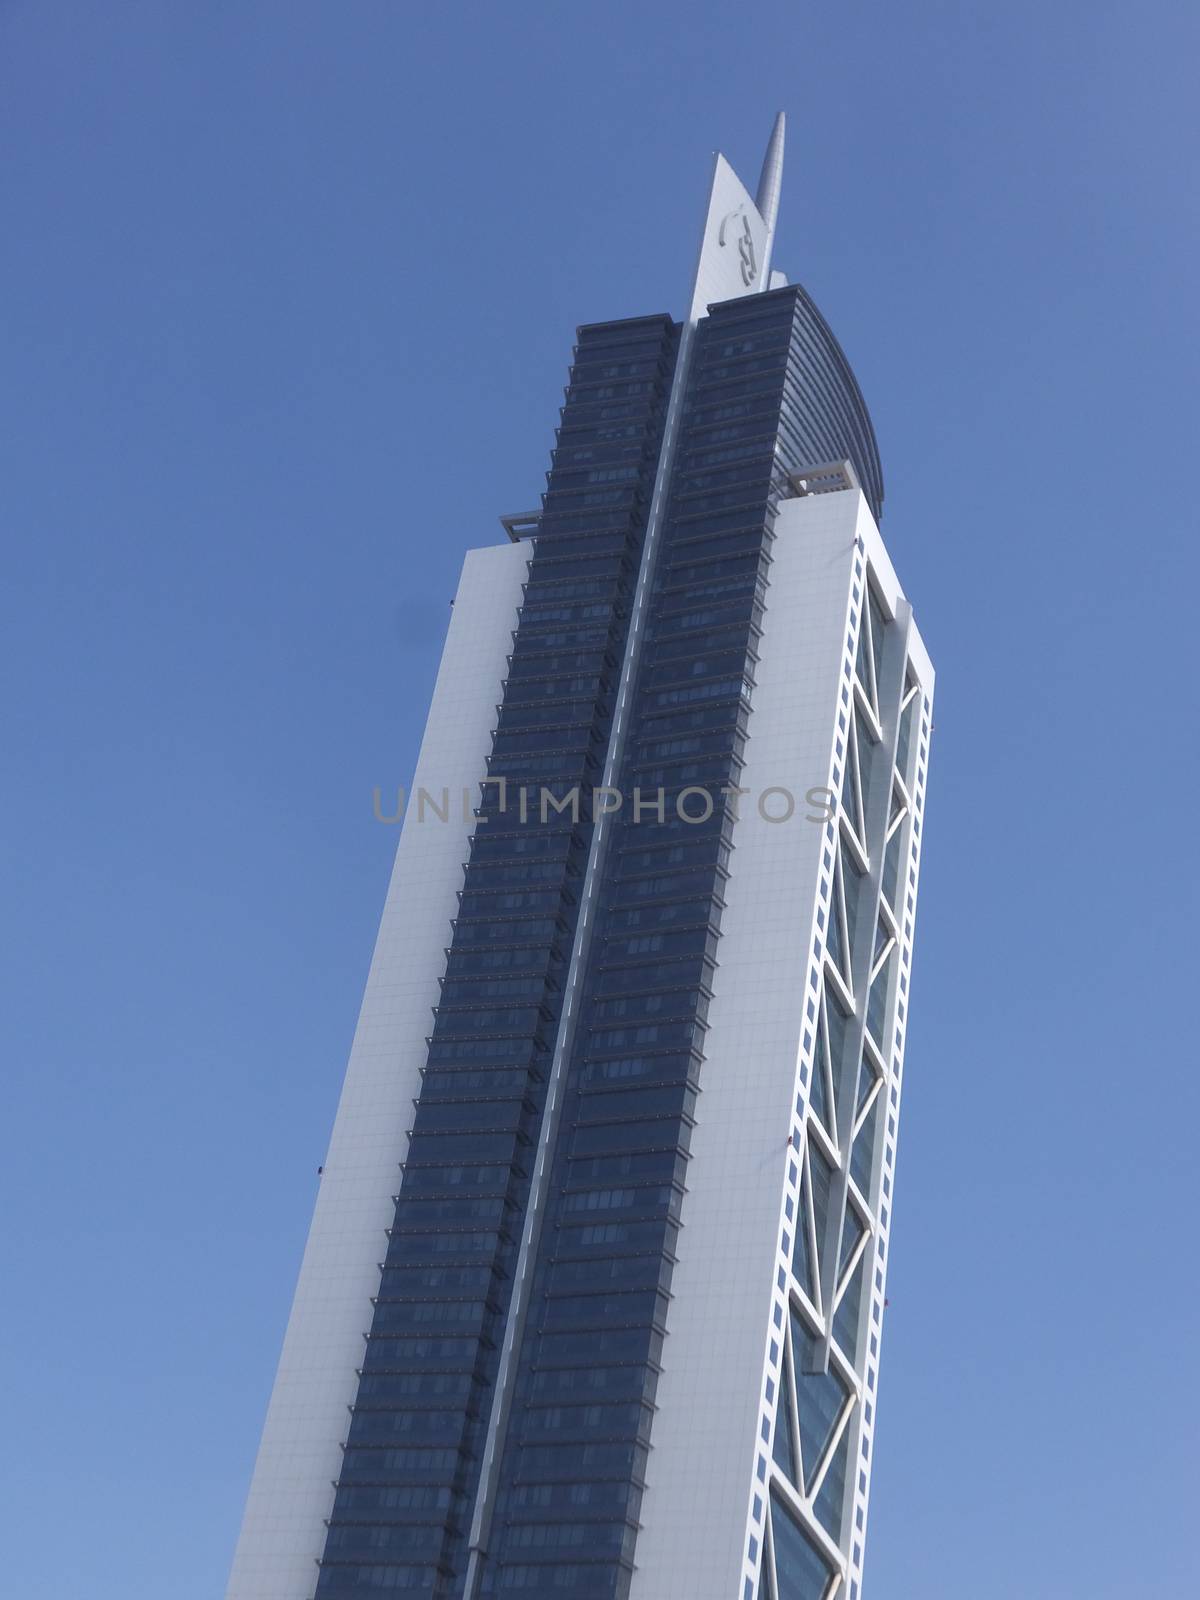 Millennium Tower on Sheikh Zayed Road in Dubai, UAE. The tower rises 285 m (935 ft) and has 60 floors.